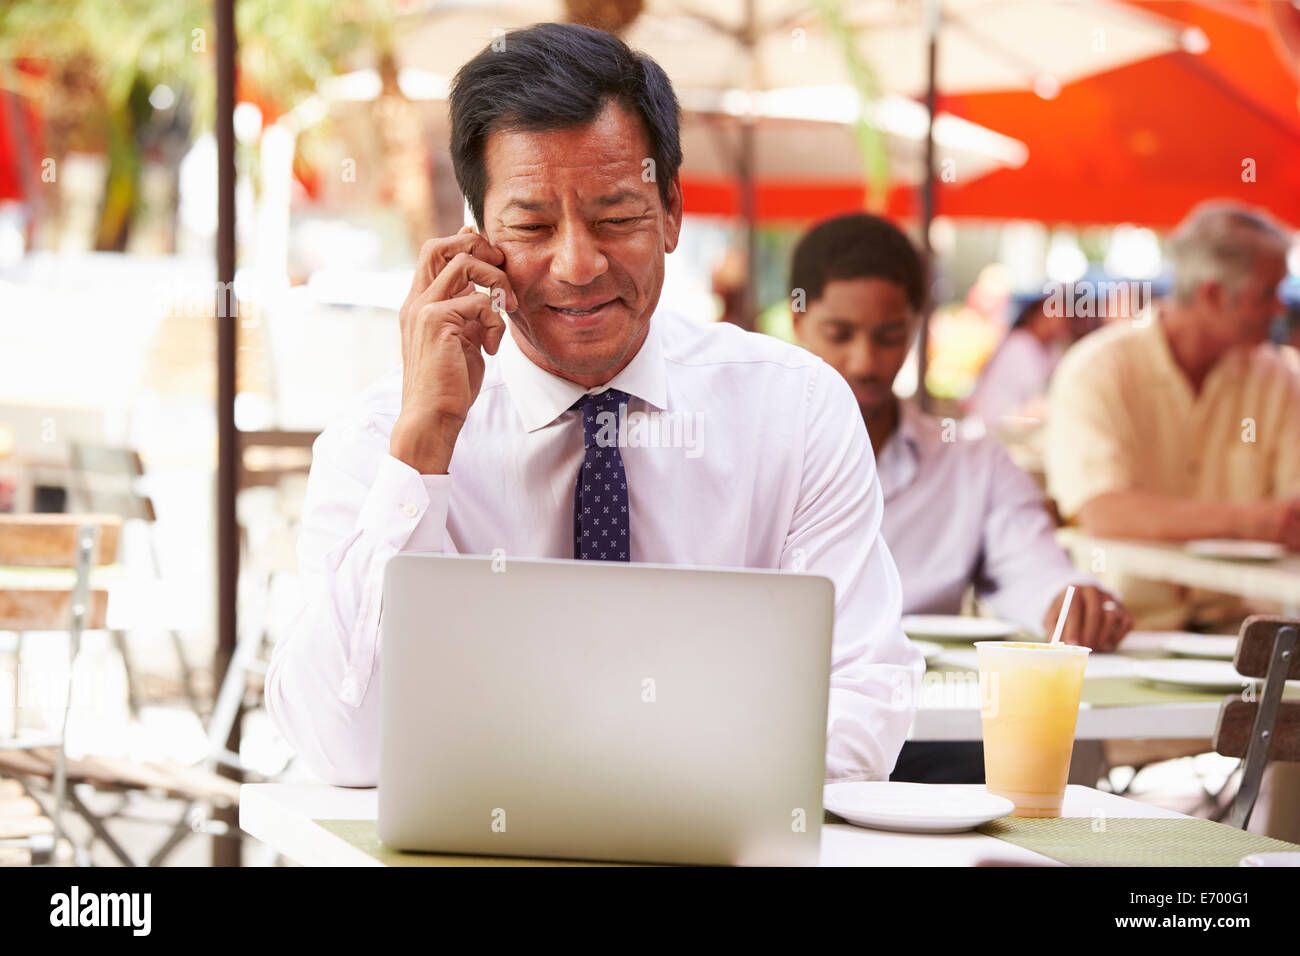 Businessman Working On Laptop In Outdoor Café Stock Photo